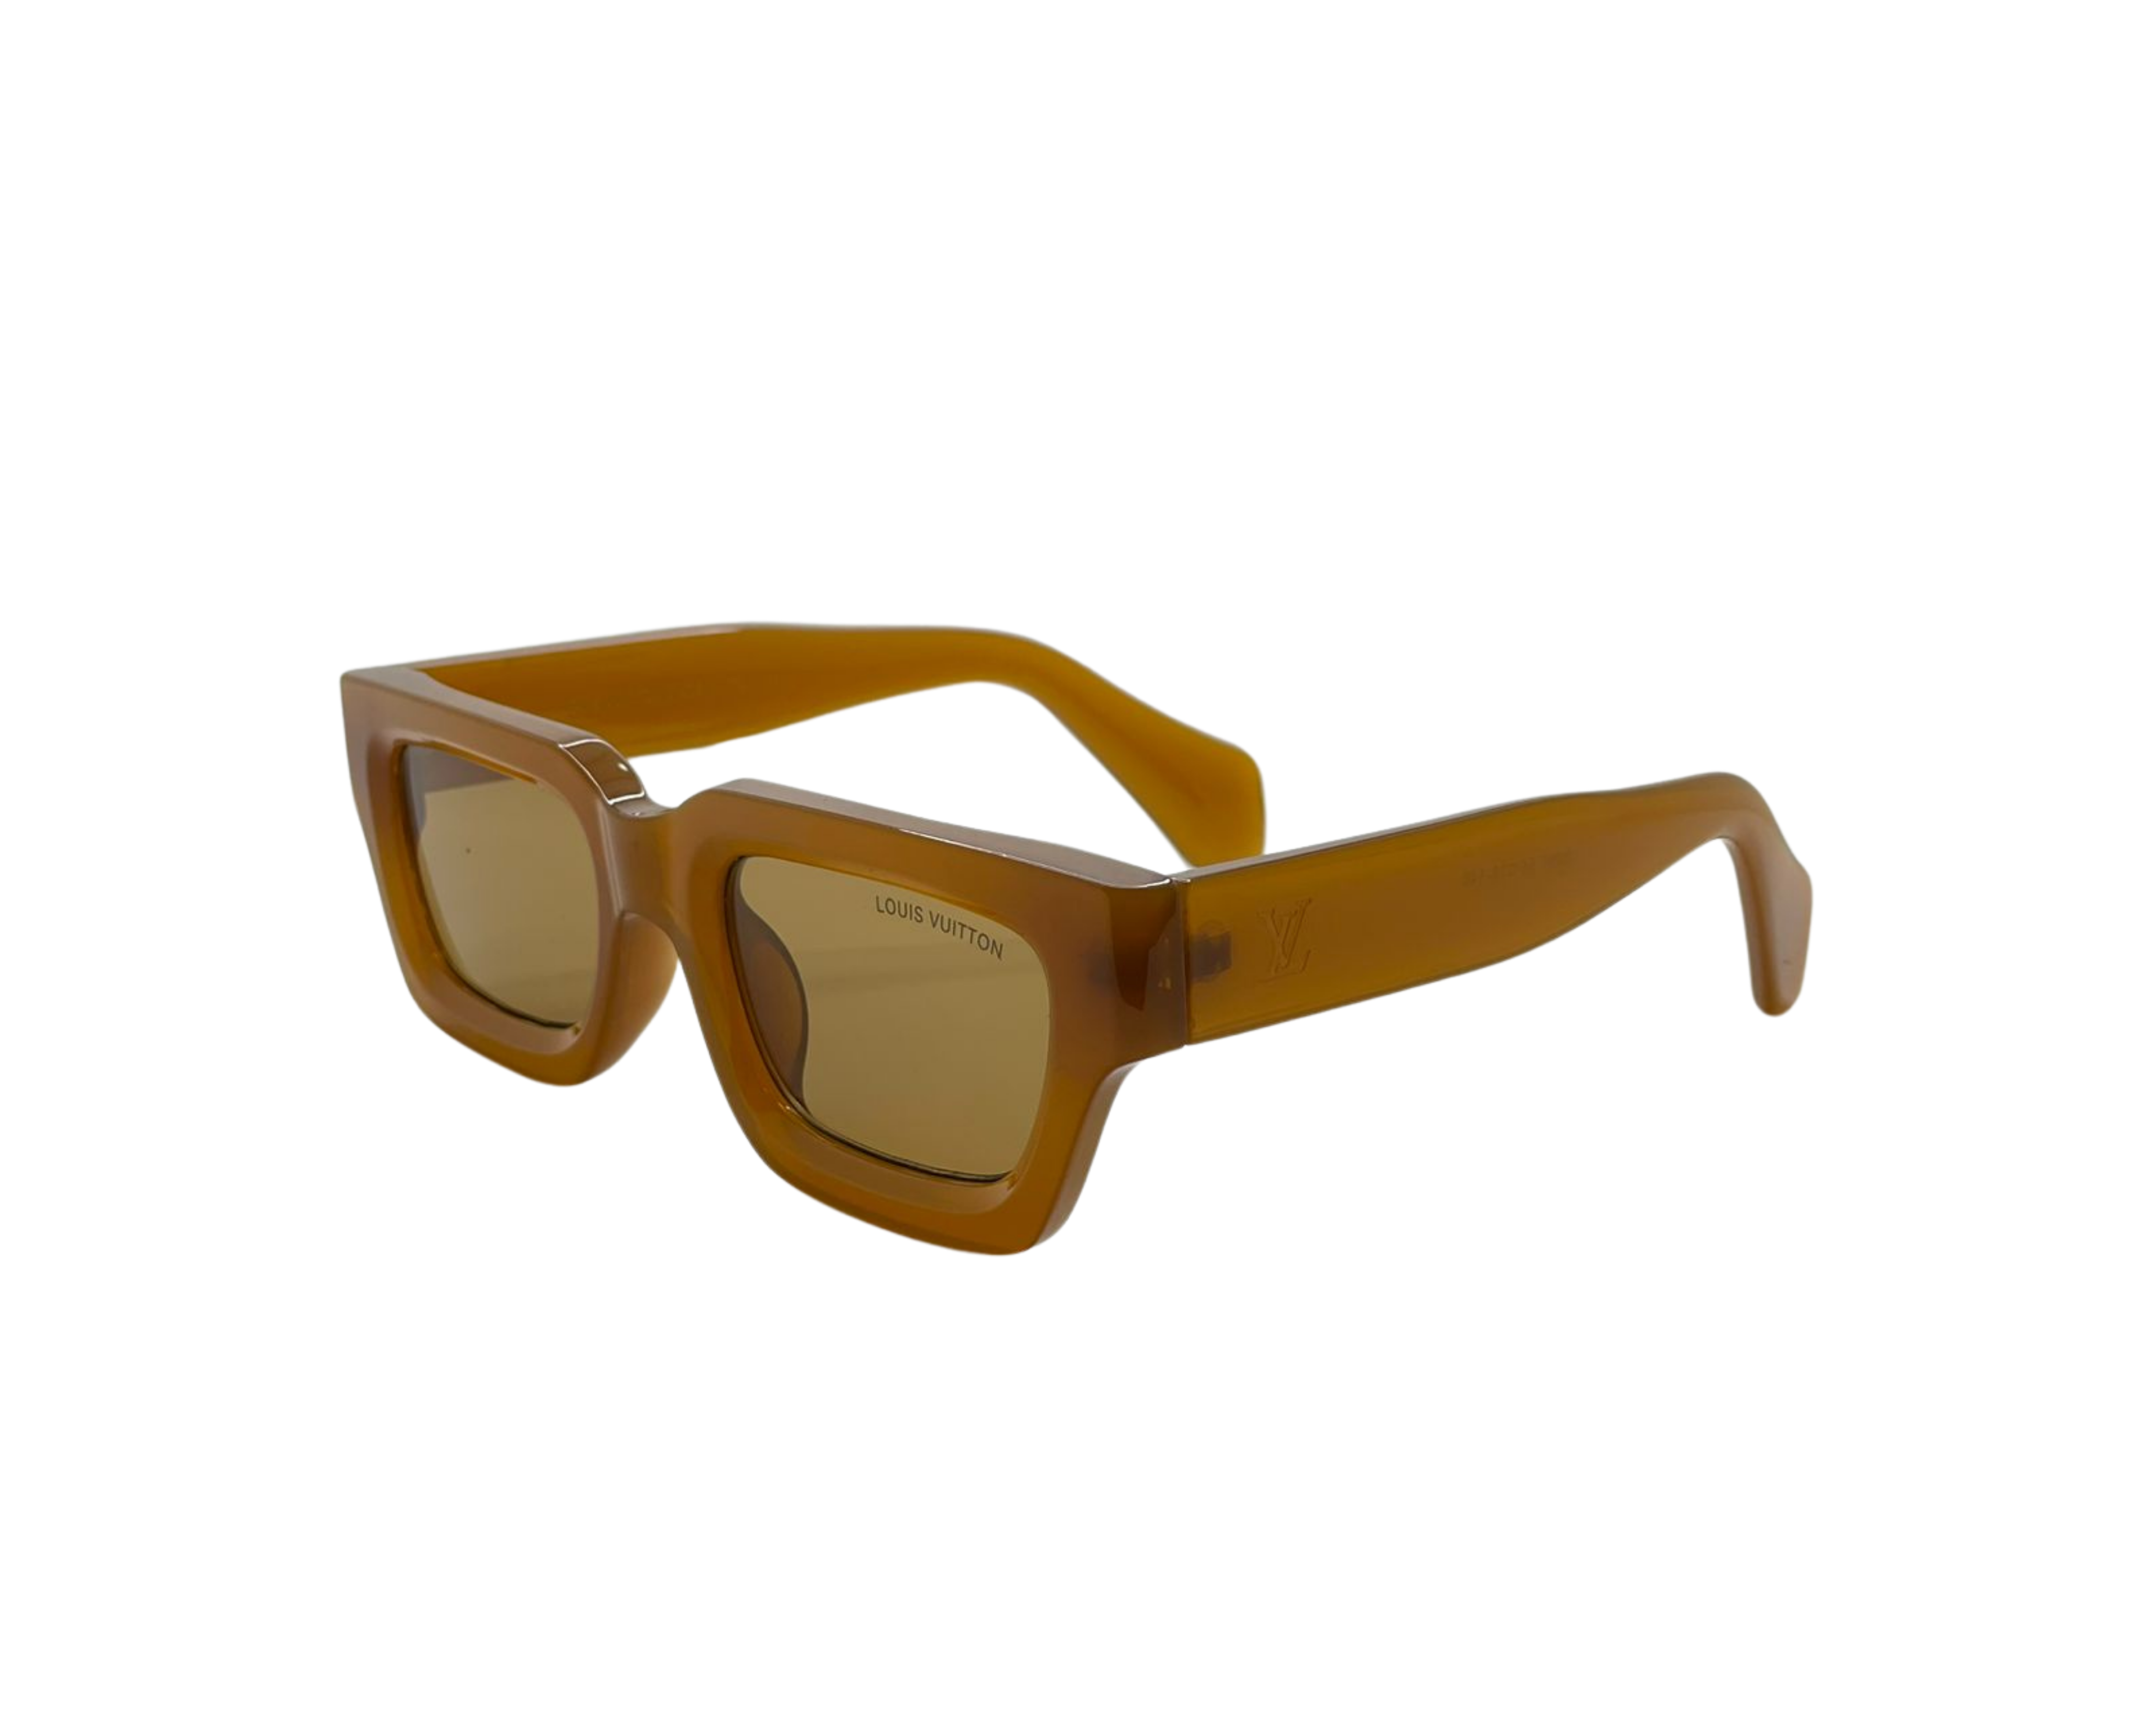 NS Deluxe - 8261 - Brown - Sunglasses